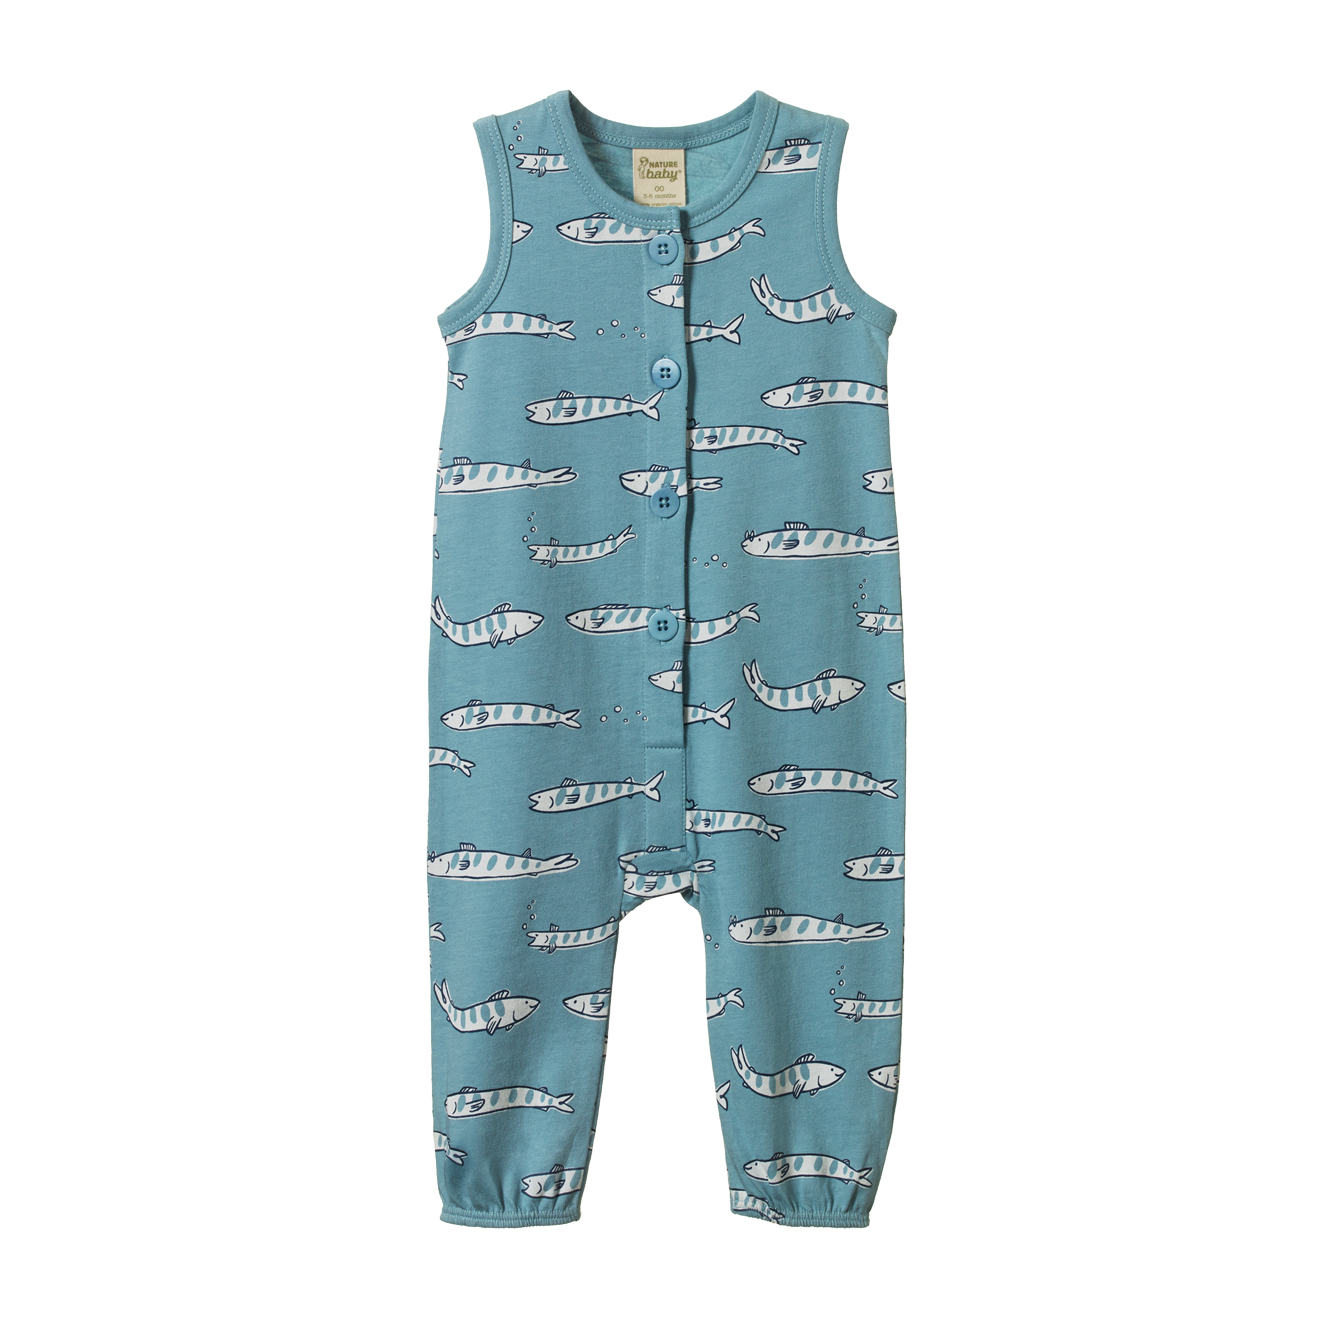 August Suit - South Seas Mineral Print